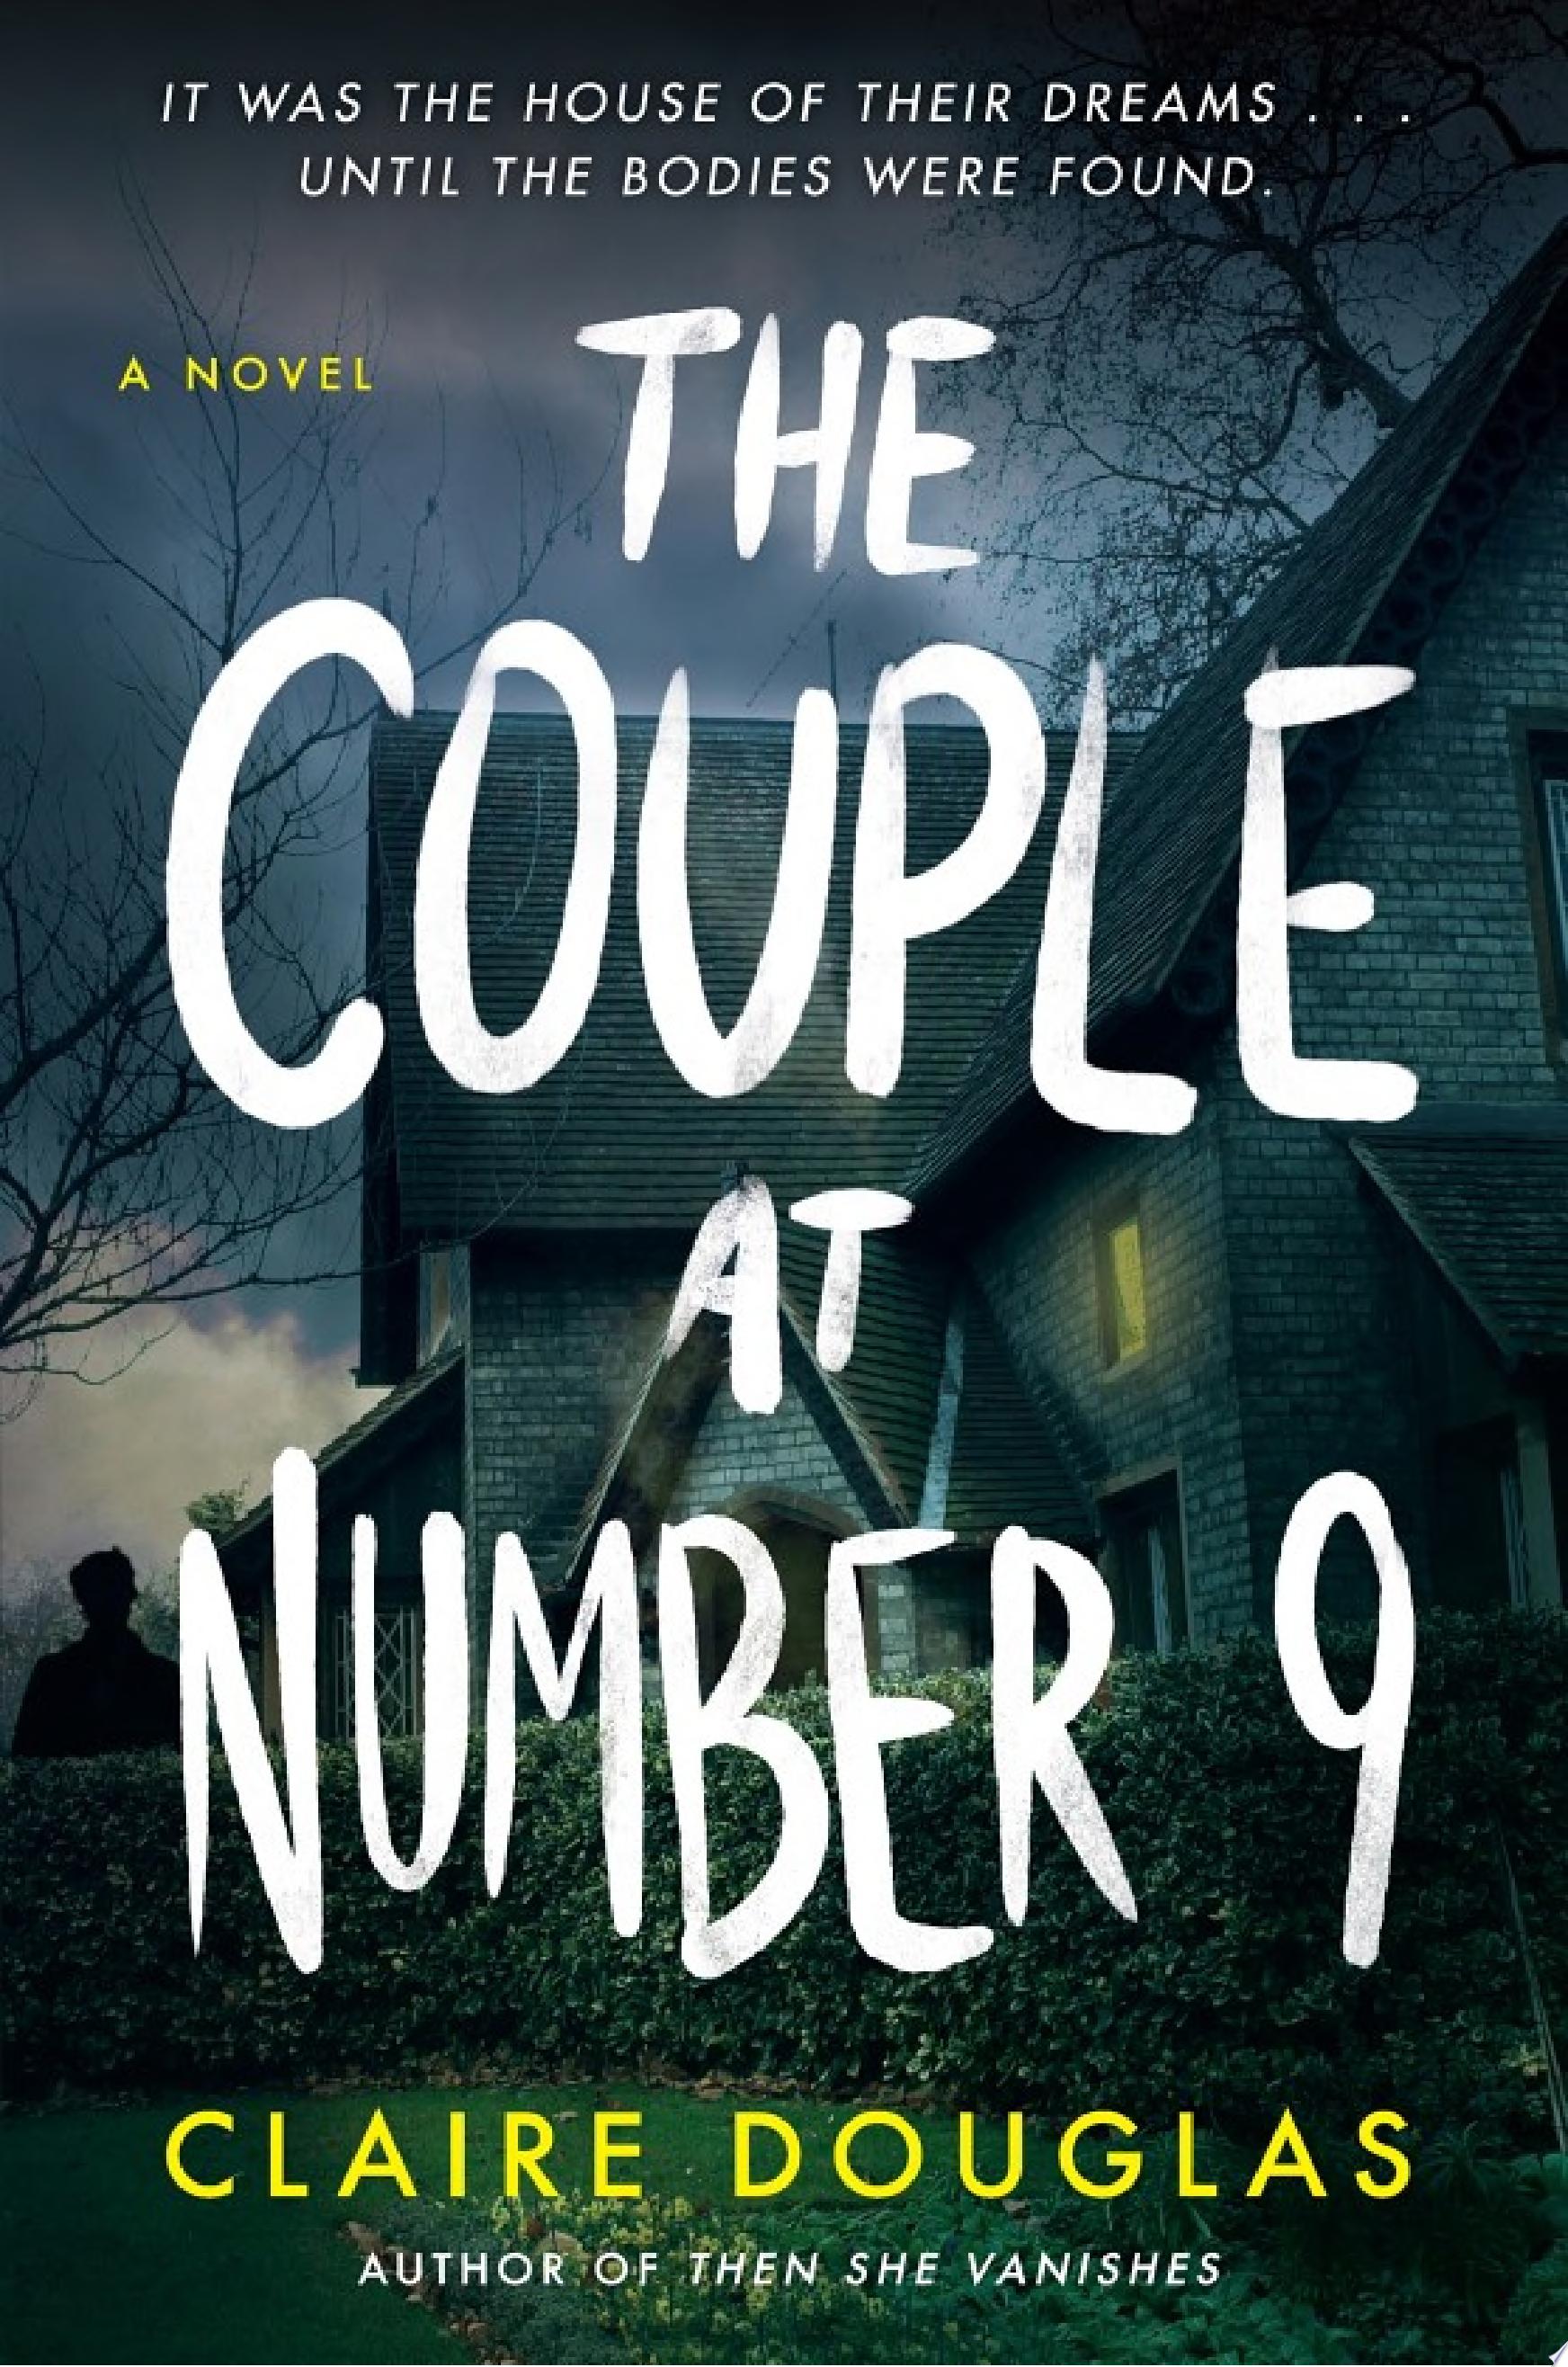 Image for "The Couple at Number 9"